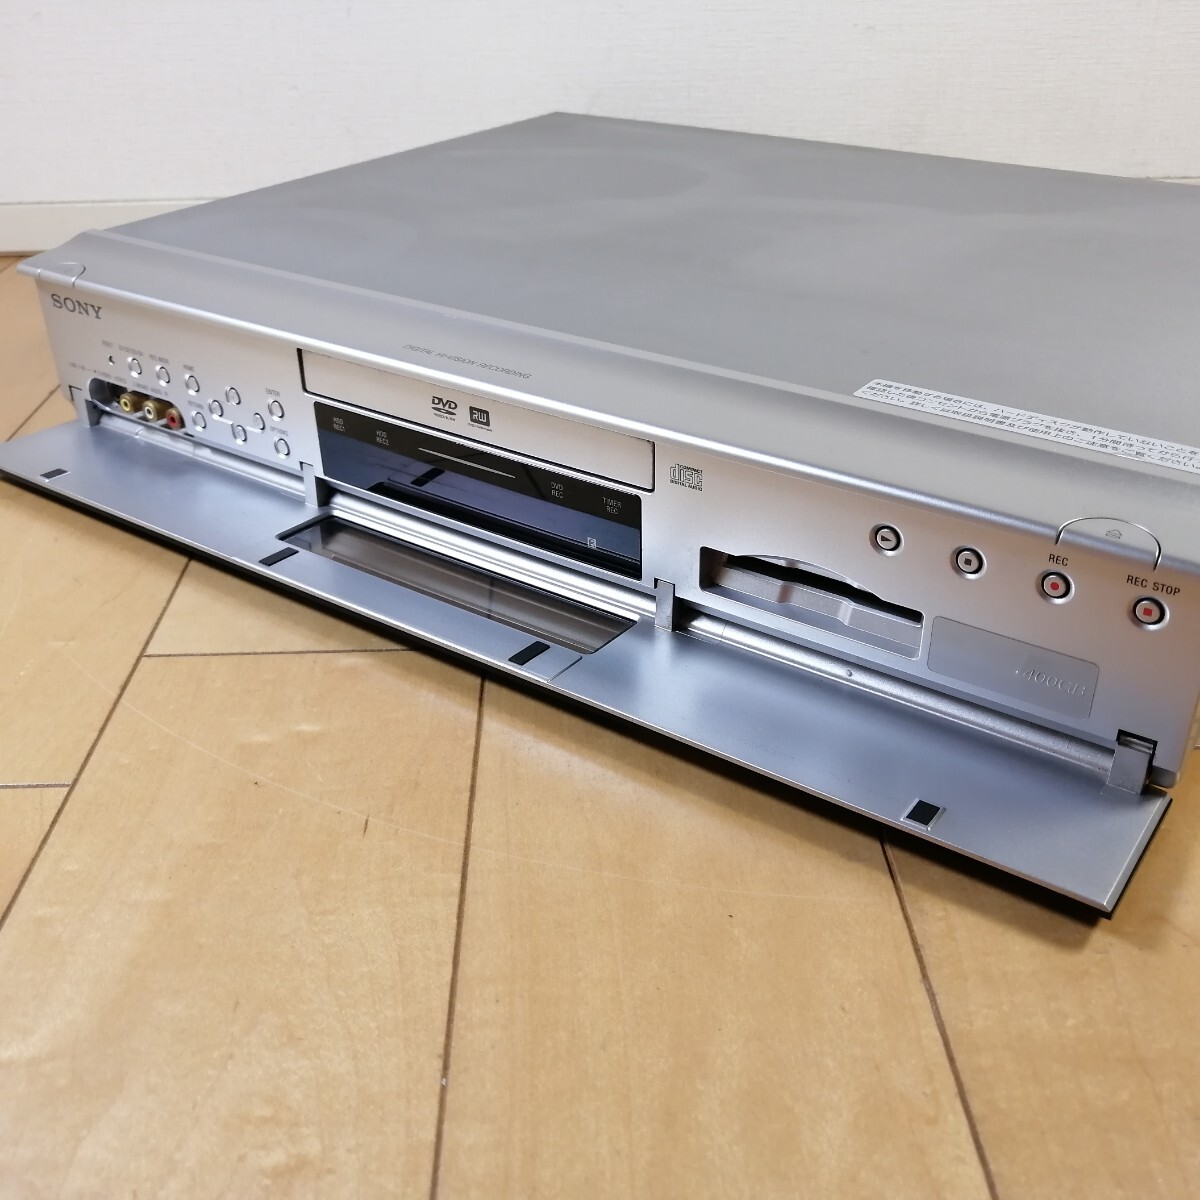 SONY Sony sgo record digital 2 number collection same time video recording possibility 400GB digital Hi-Vision DVD recorder RDZ-D800 operation verification settled!!